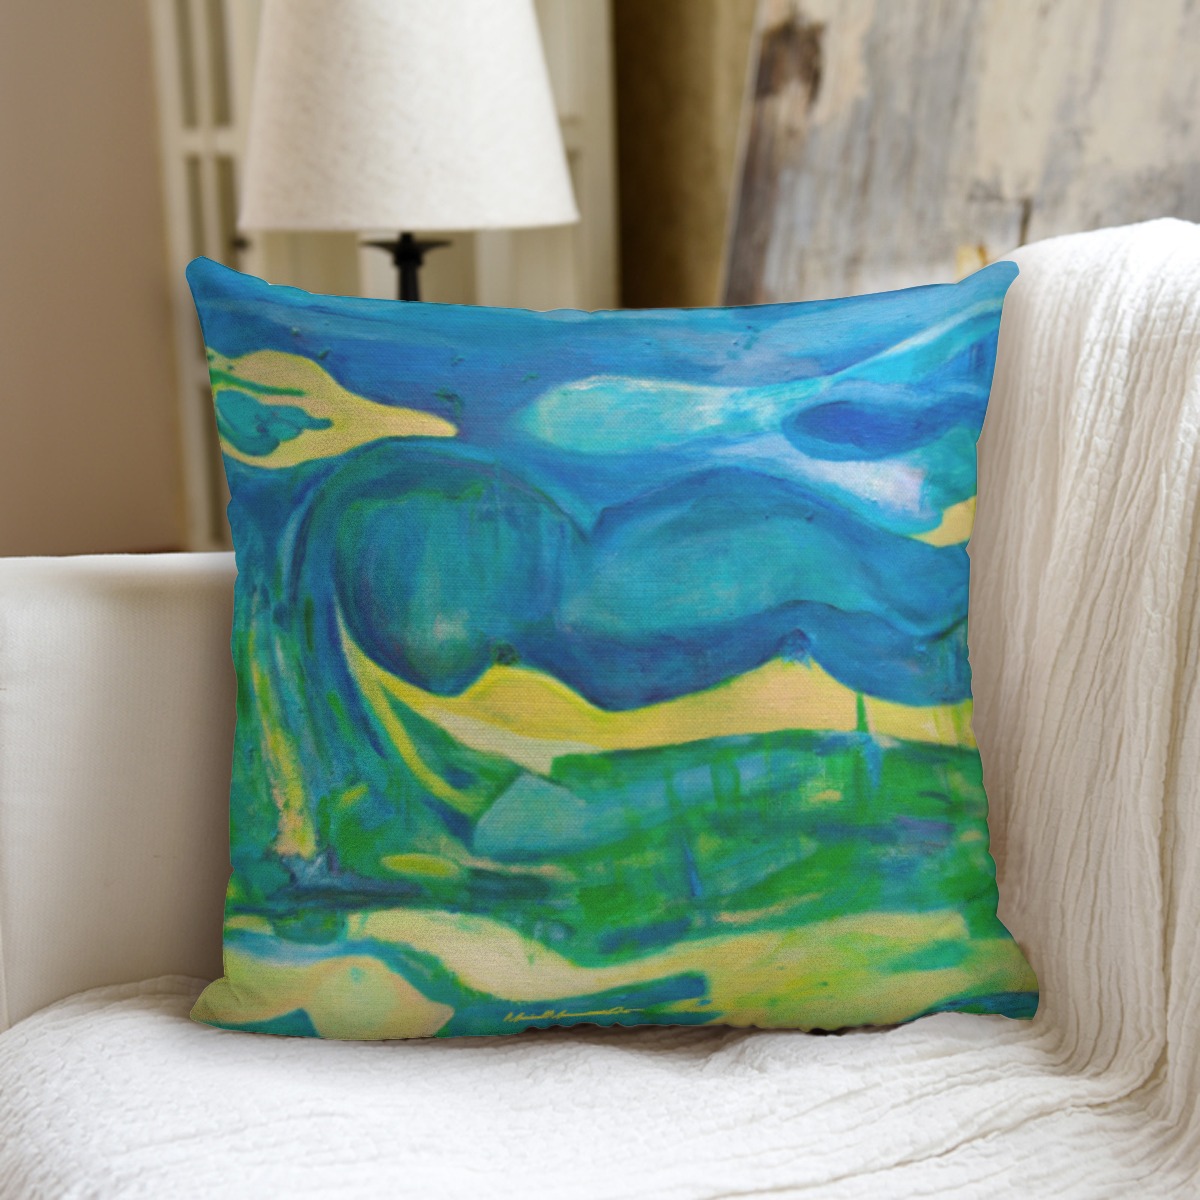 Couch Pillow With Pillow Insert Under The Sea Collection